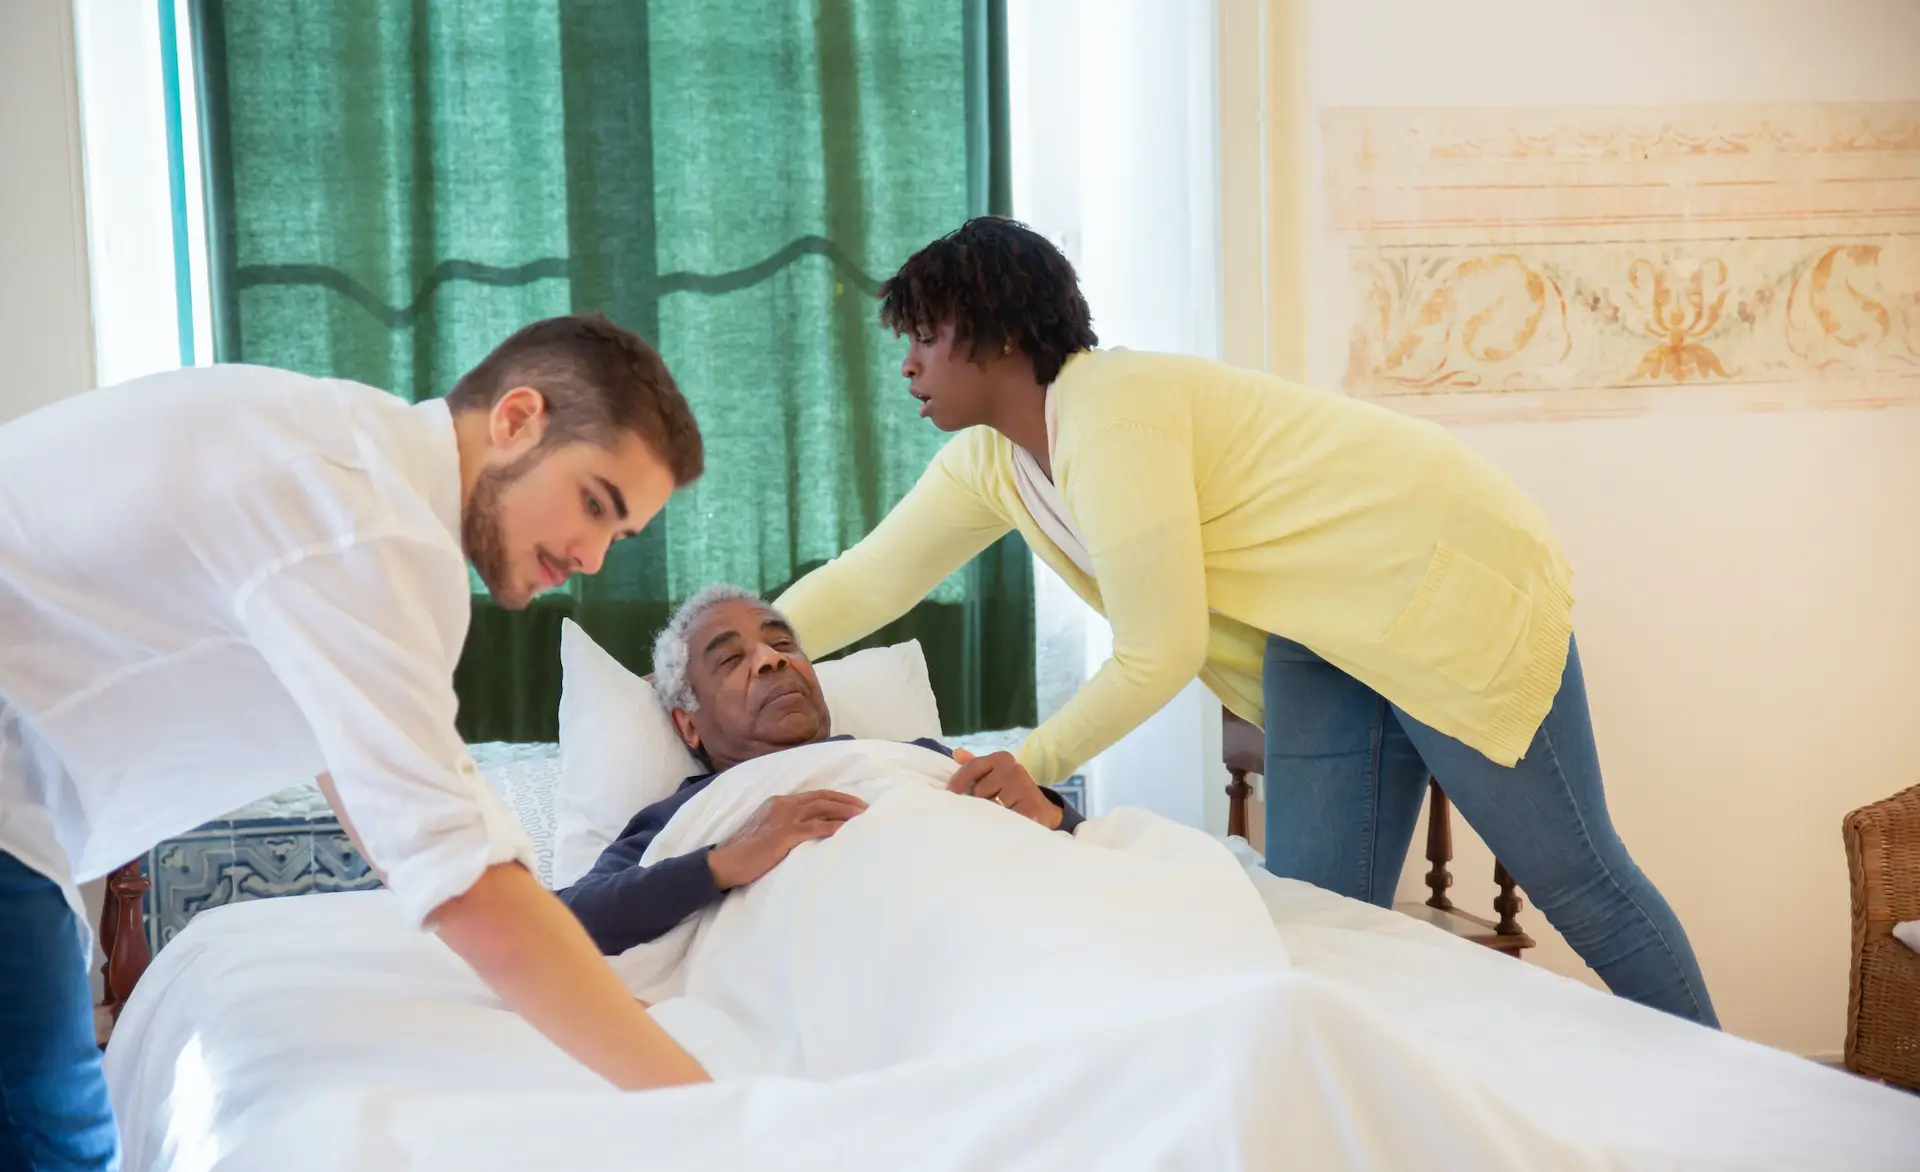 an image of two healthcare staff caring for a patient